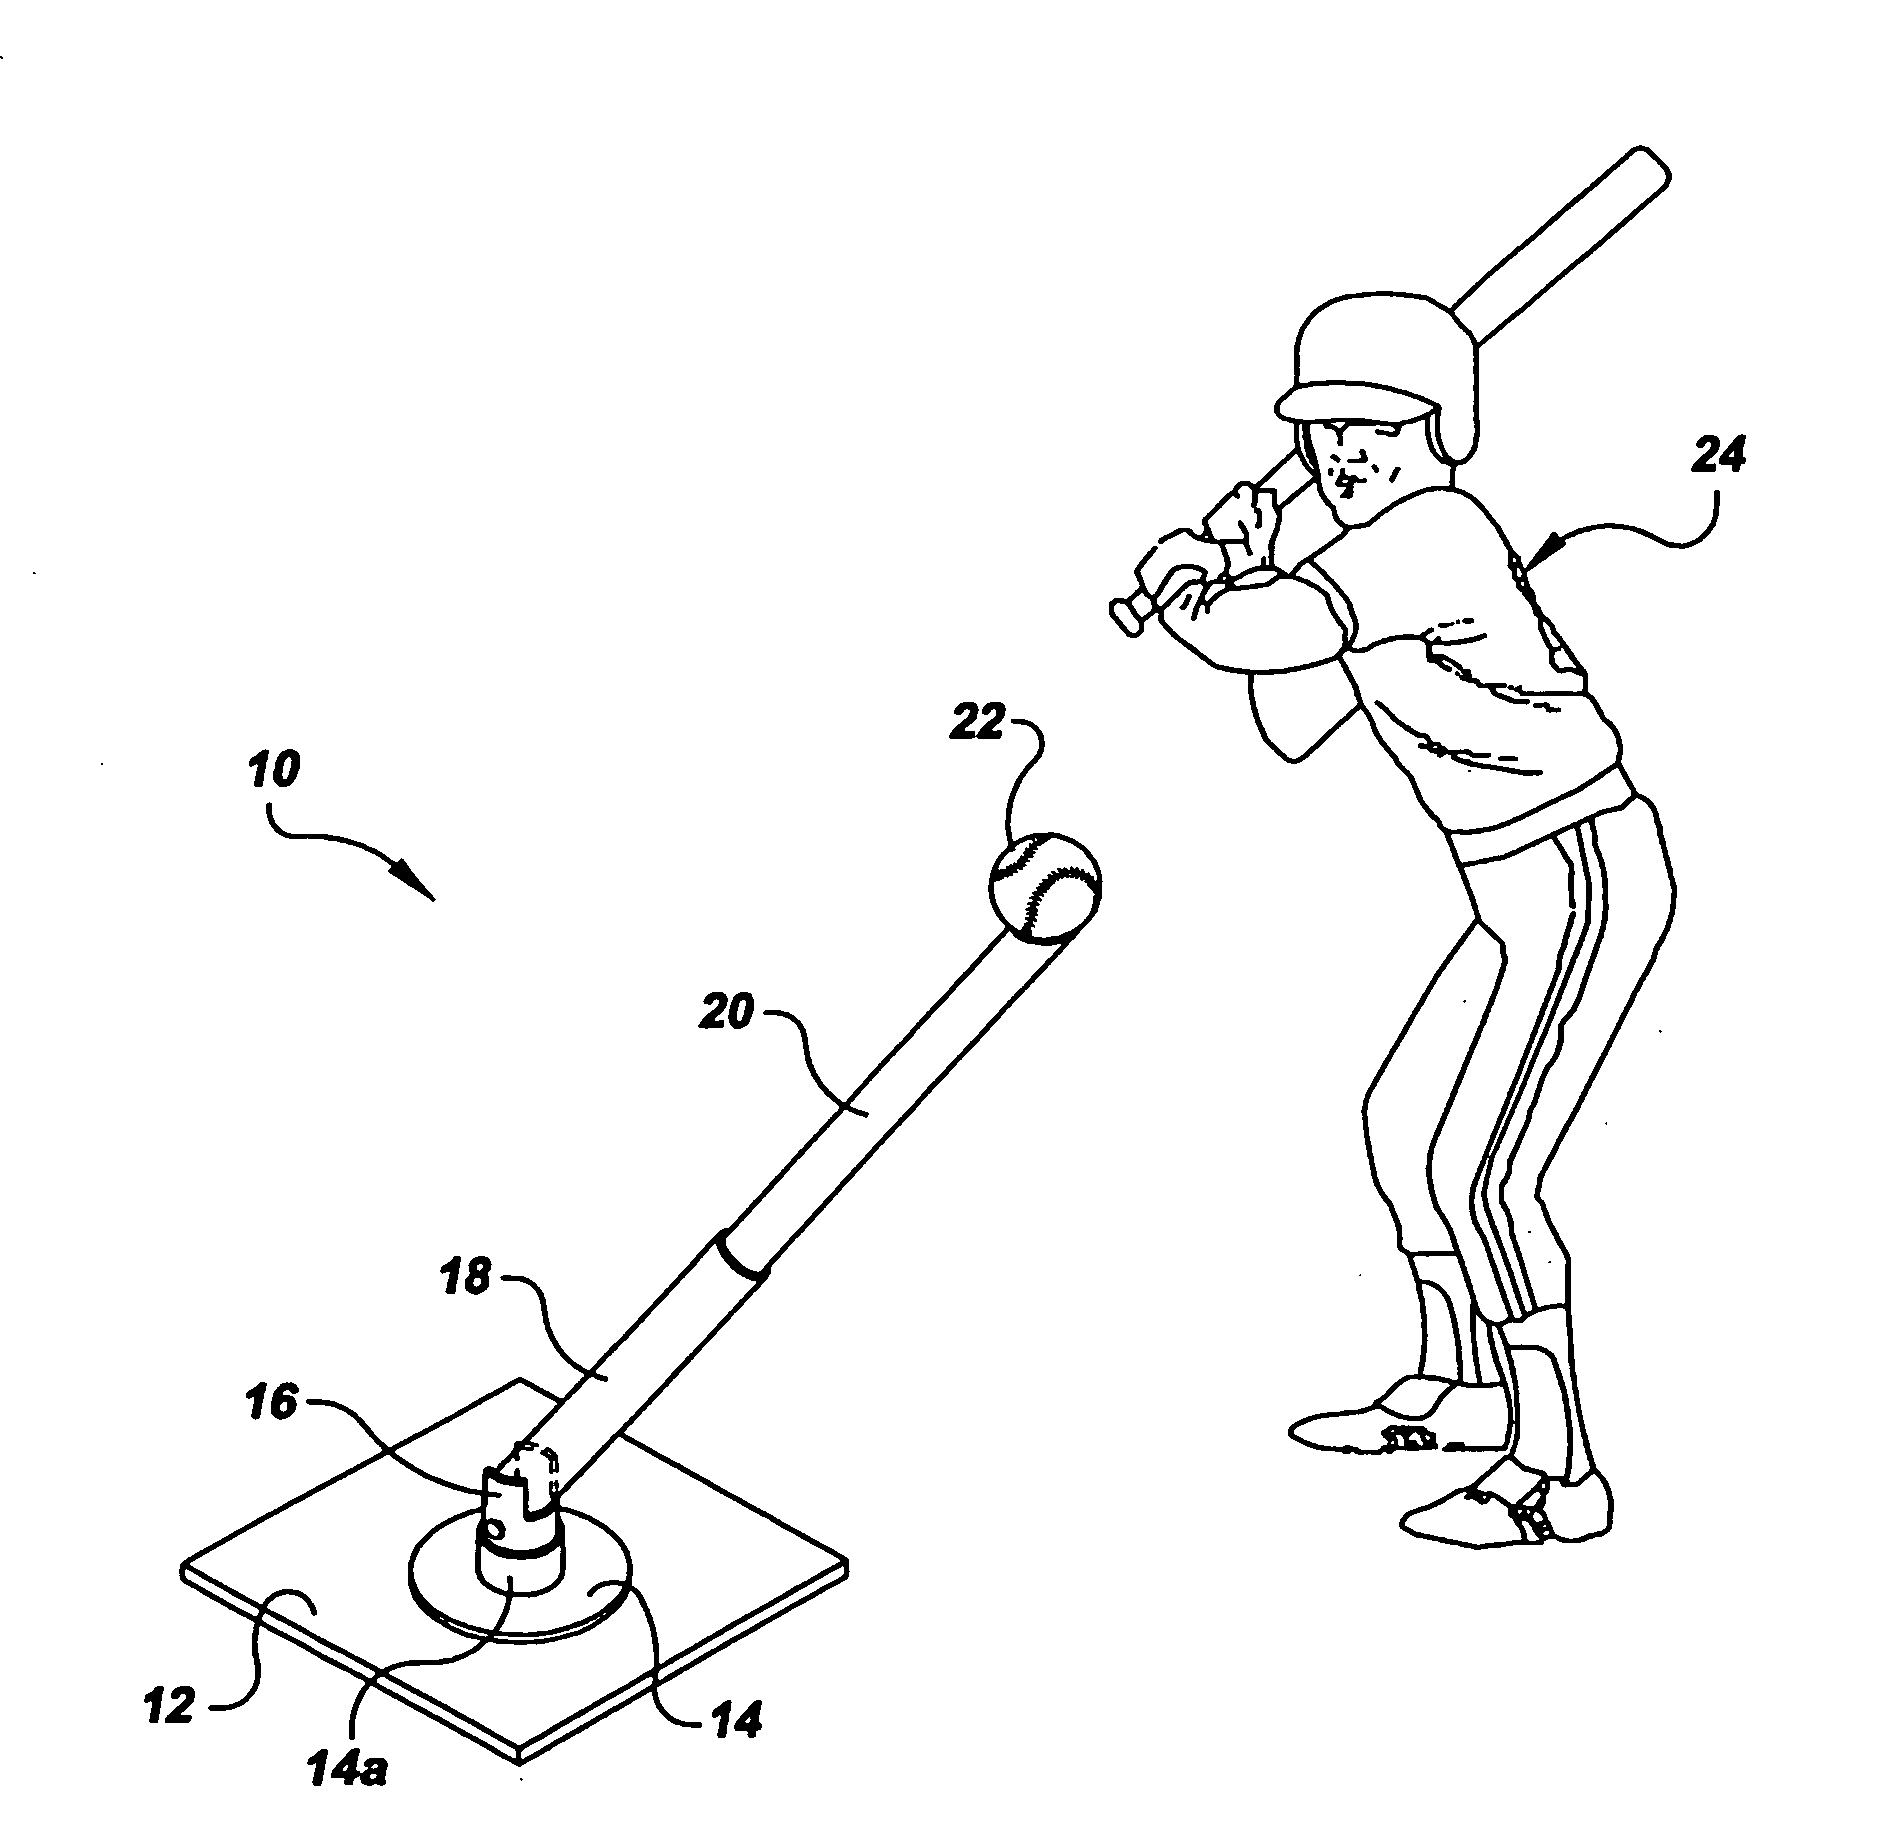 Angled hitting stand apparatus and method